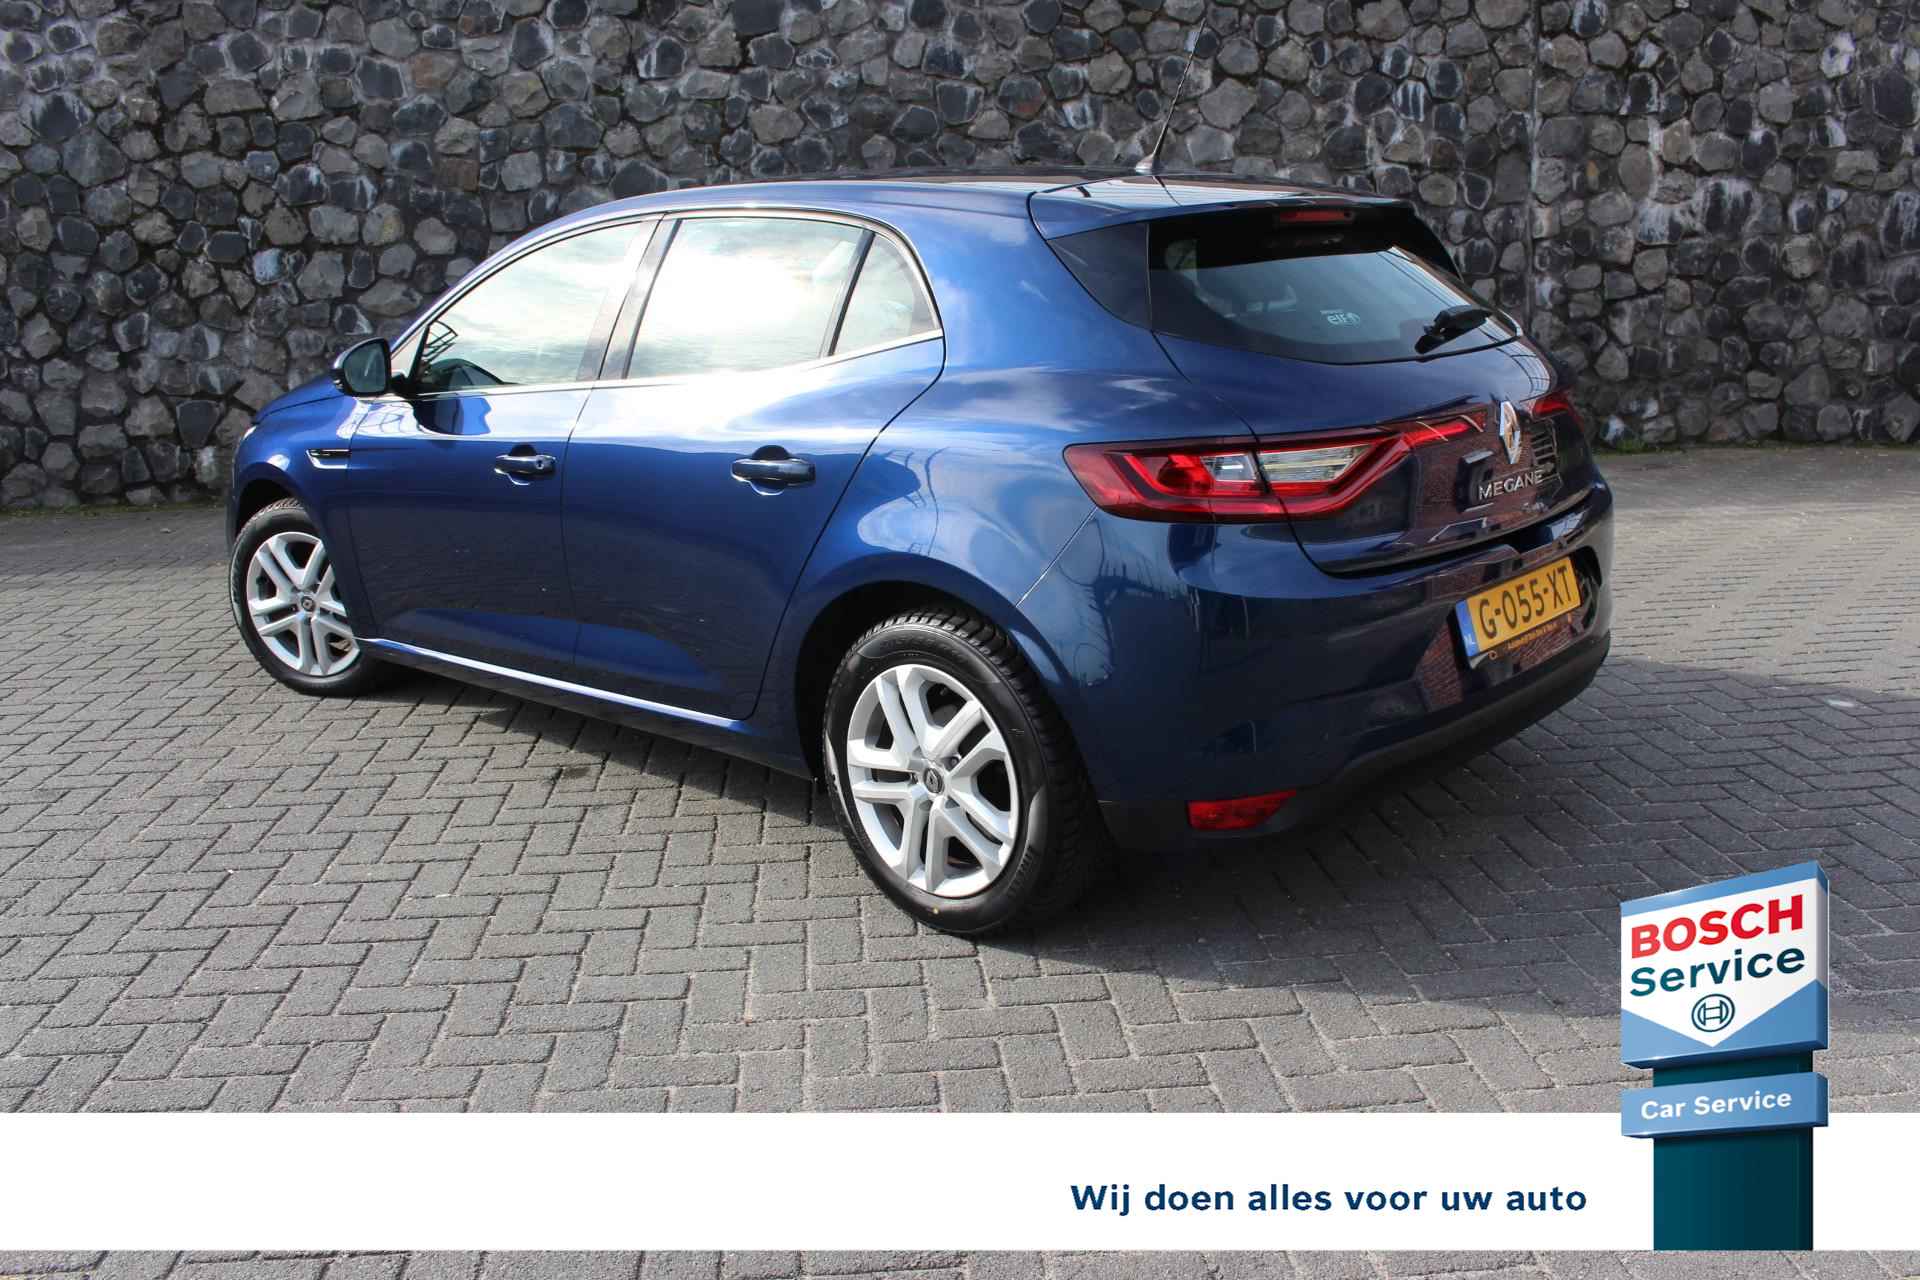 Renault Mégane 1.3 TCe Zen Dab+ audio Climate + cruise control Navi PDC achter Led verlichting voor + achter - 34/34